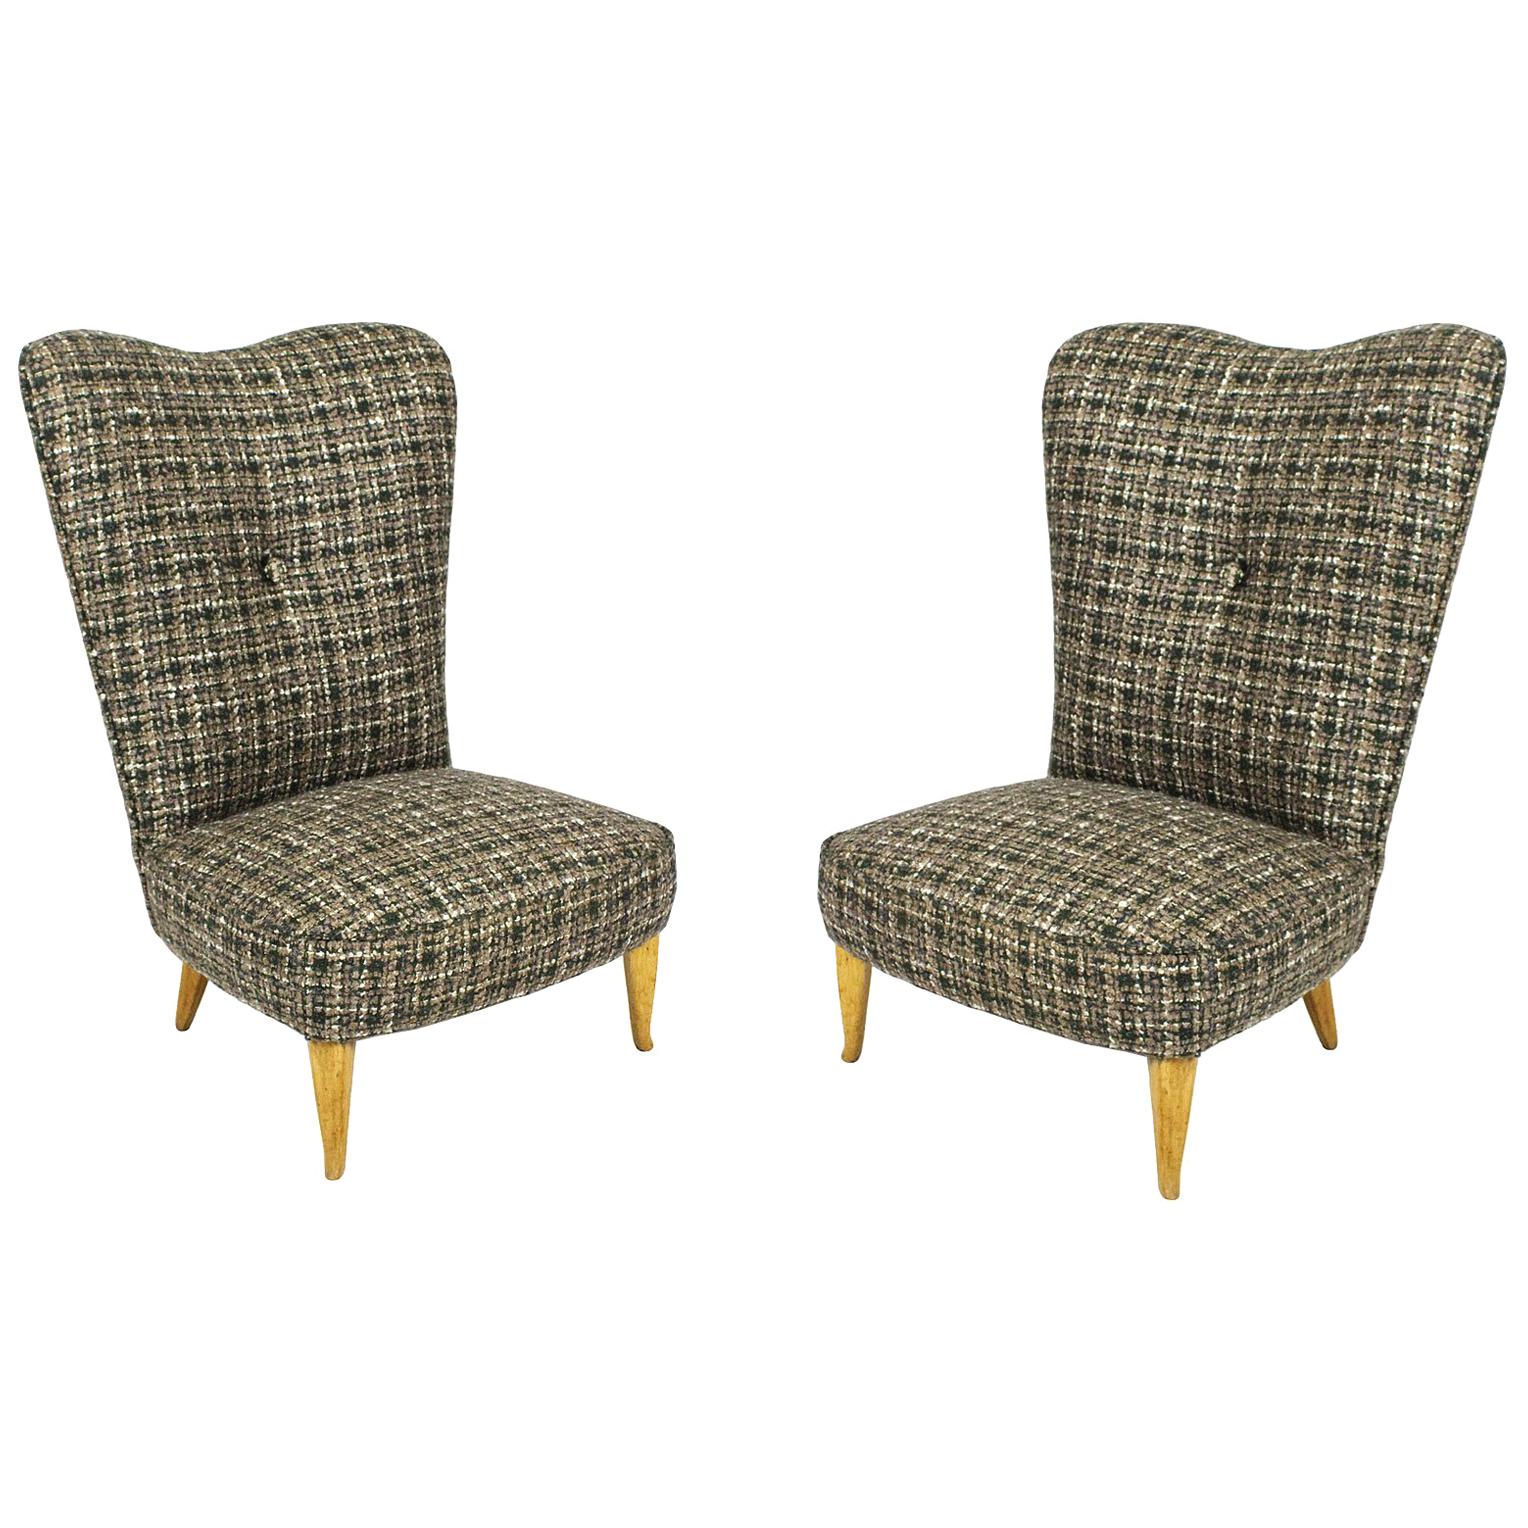 Pair of Mid-Century Modern Low Chairs in Green, Beige and White Wool - Italy For Sale